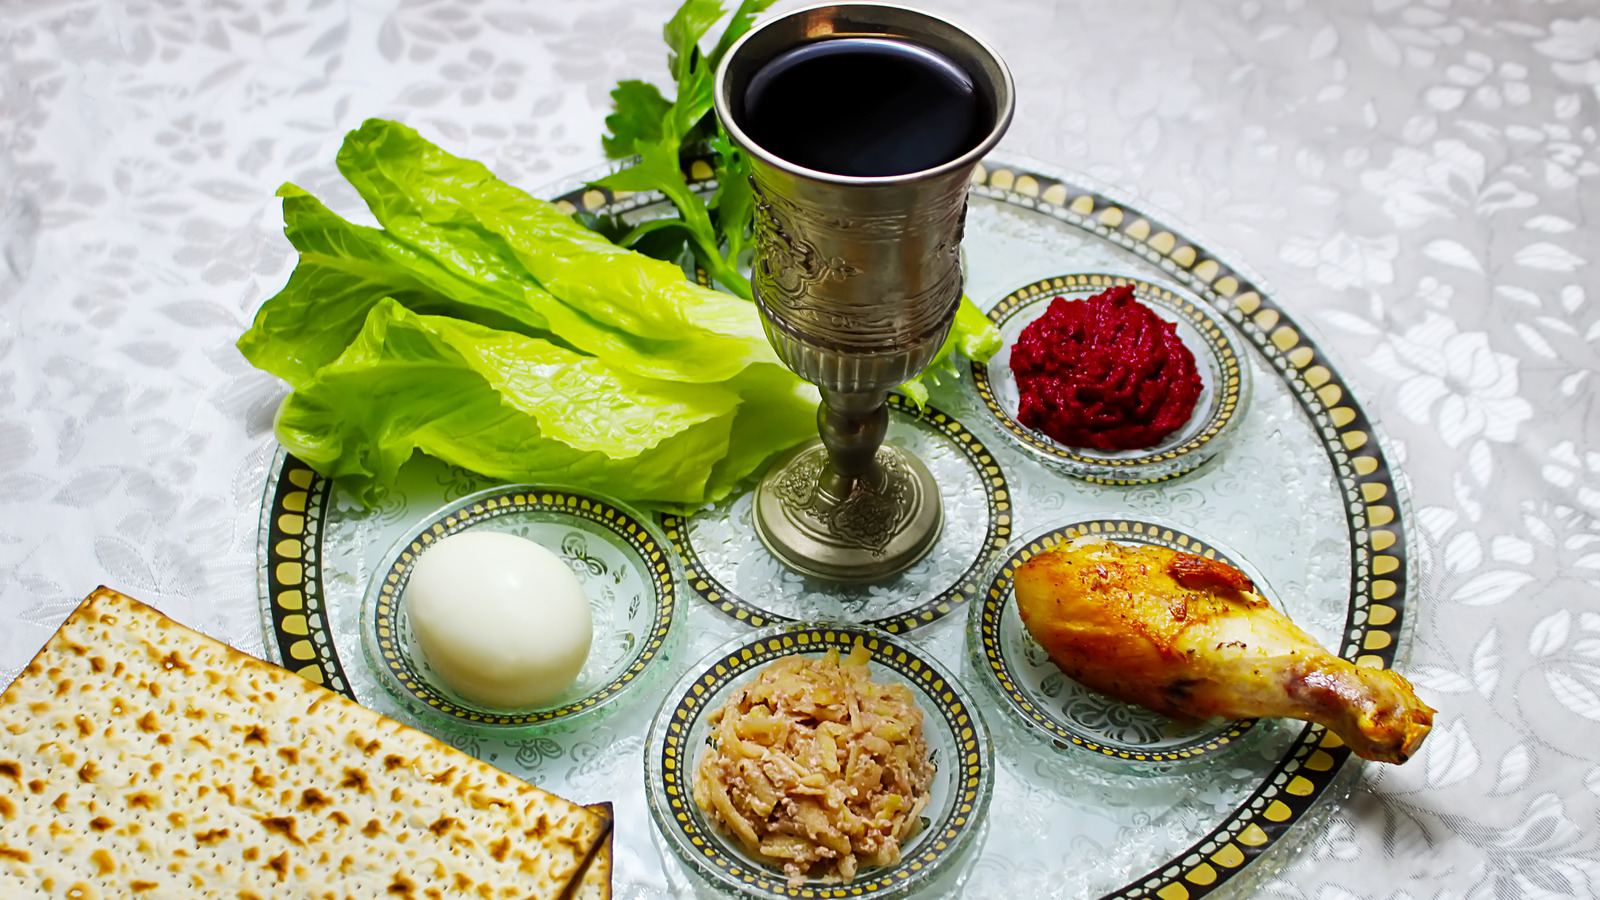 Jewish Chef Explains How To Spice Up Your Traditional Passover Meal – Mashed